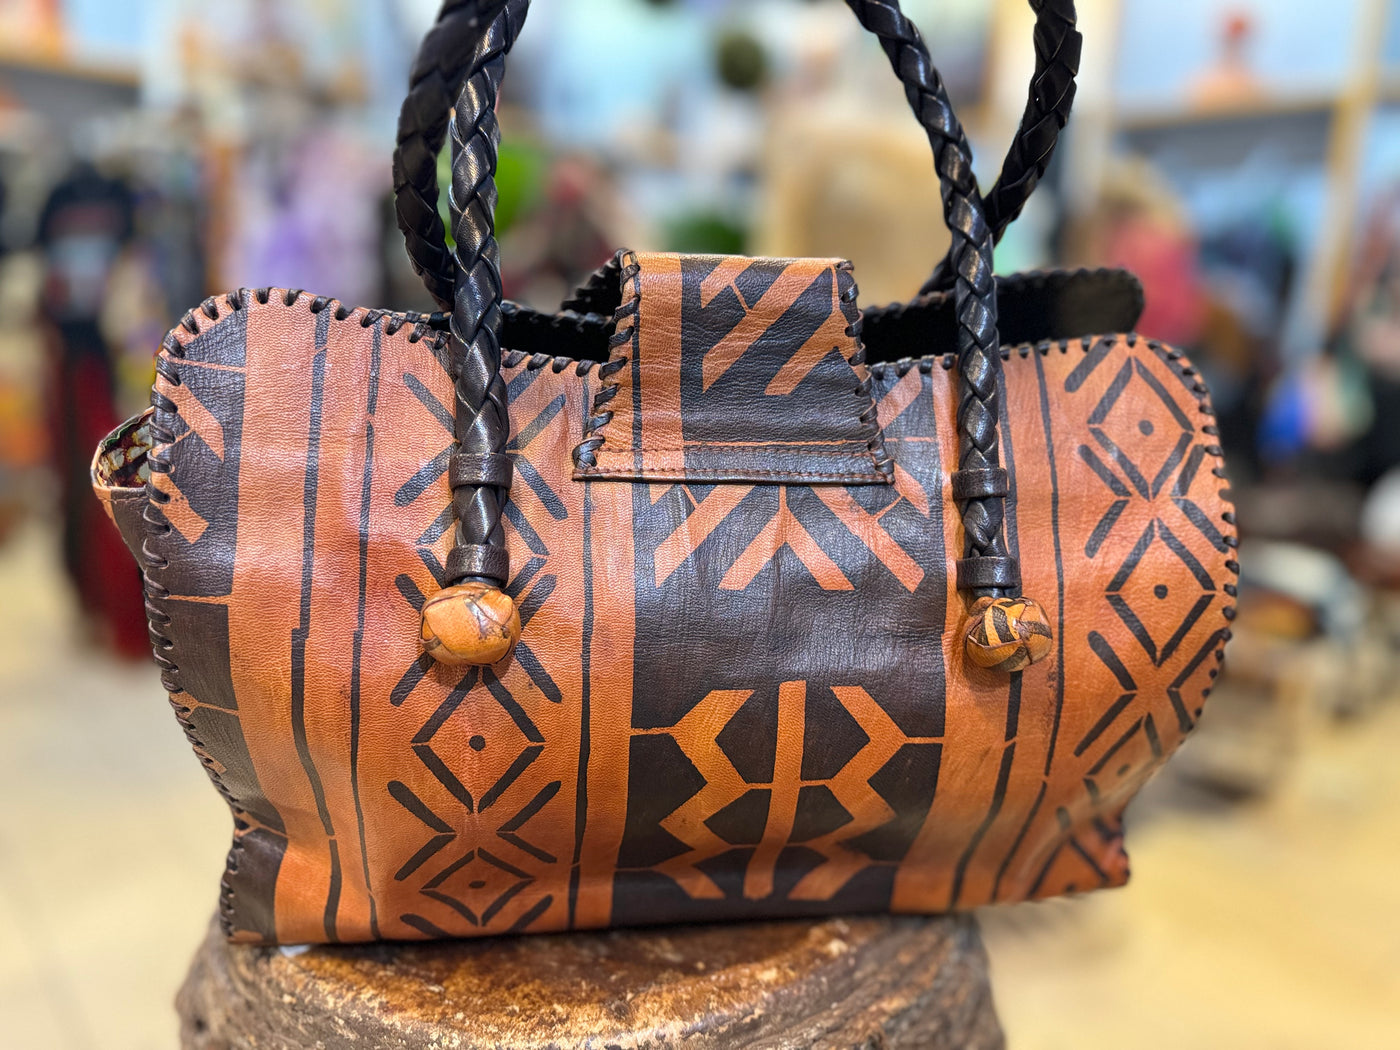 Authentique Real Leather Bag From Mali